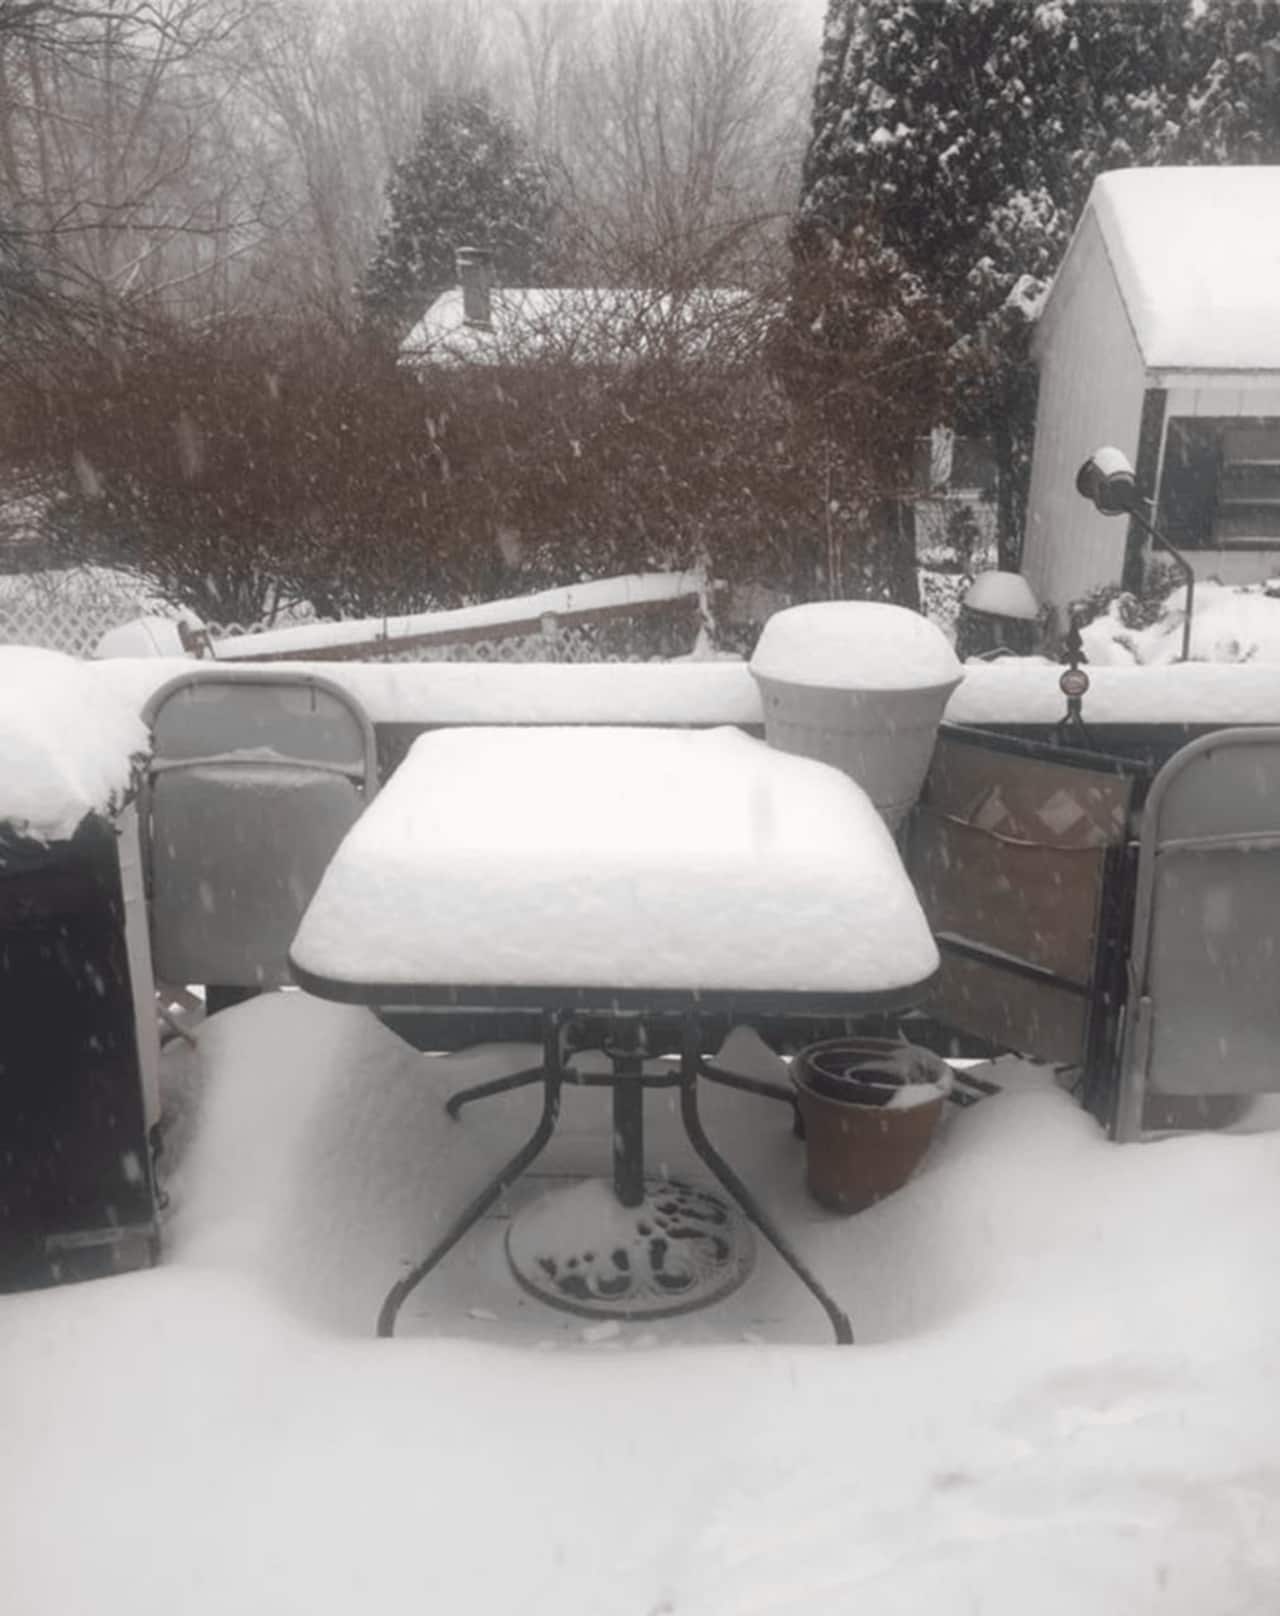 Tina Lynn of Dover Plains snapped this photo just before noon showing well over a half foot of snow accumulation.